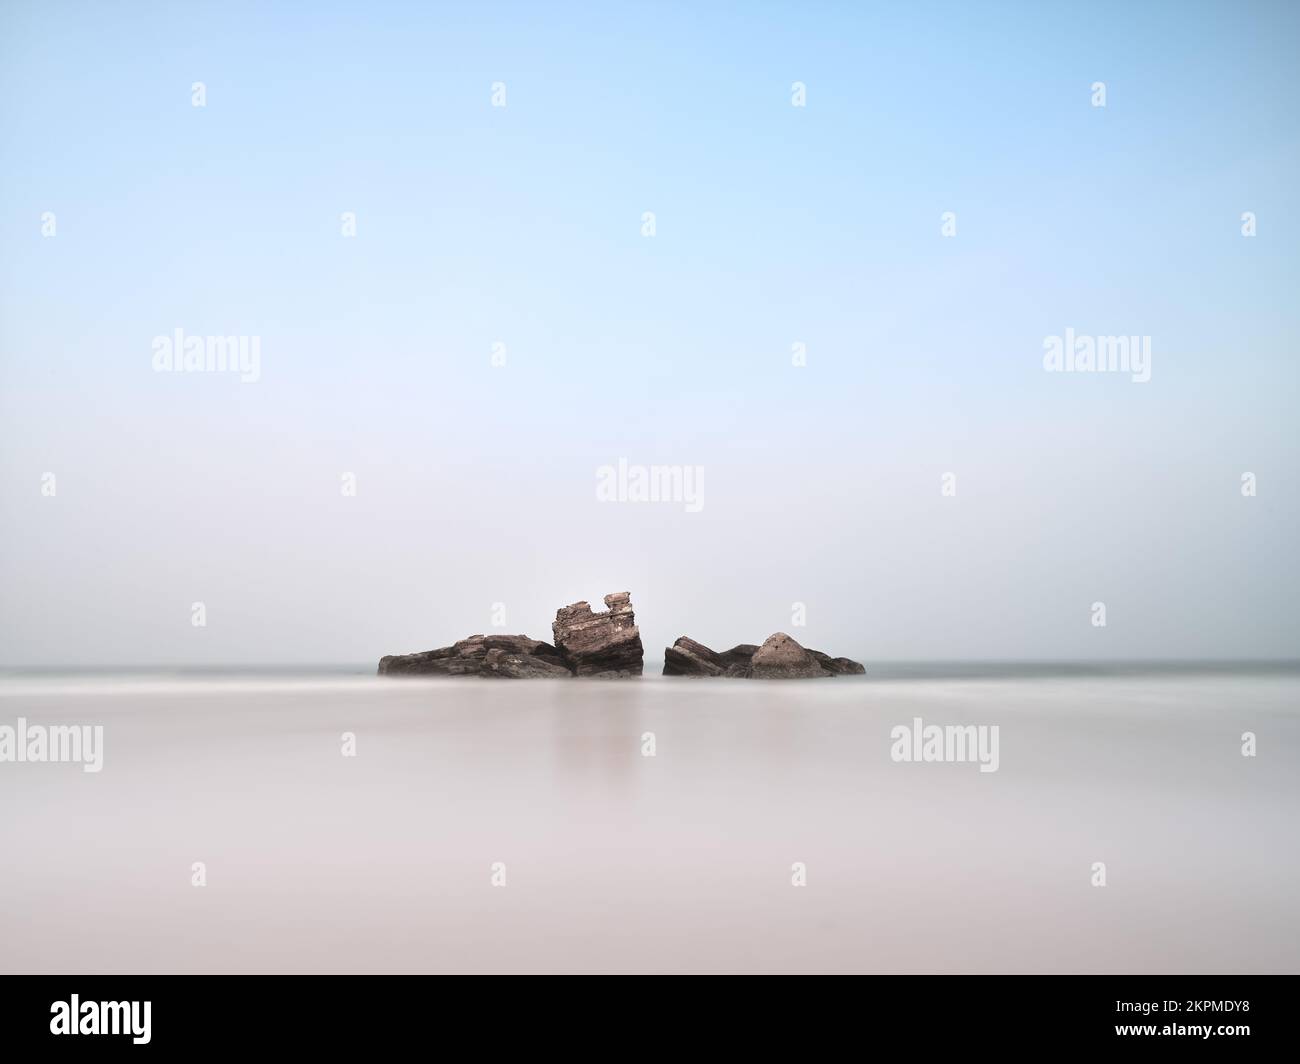 Two rock formations on an empty beach, Morocco Stock Photo